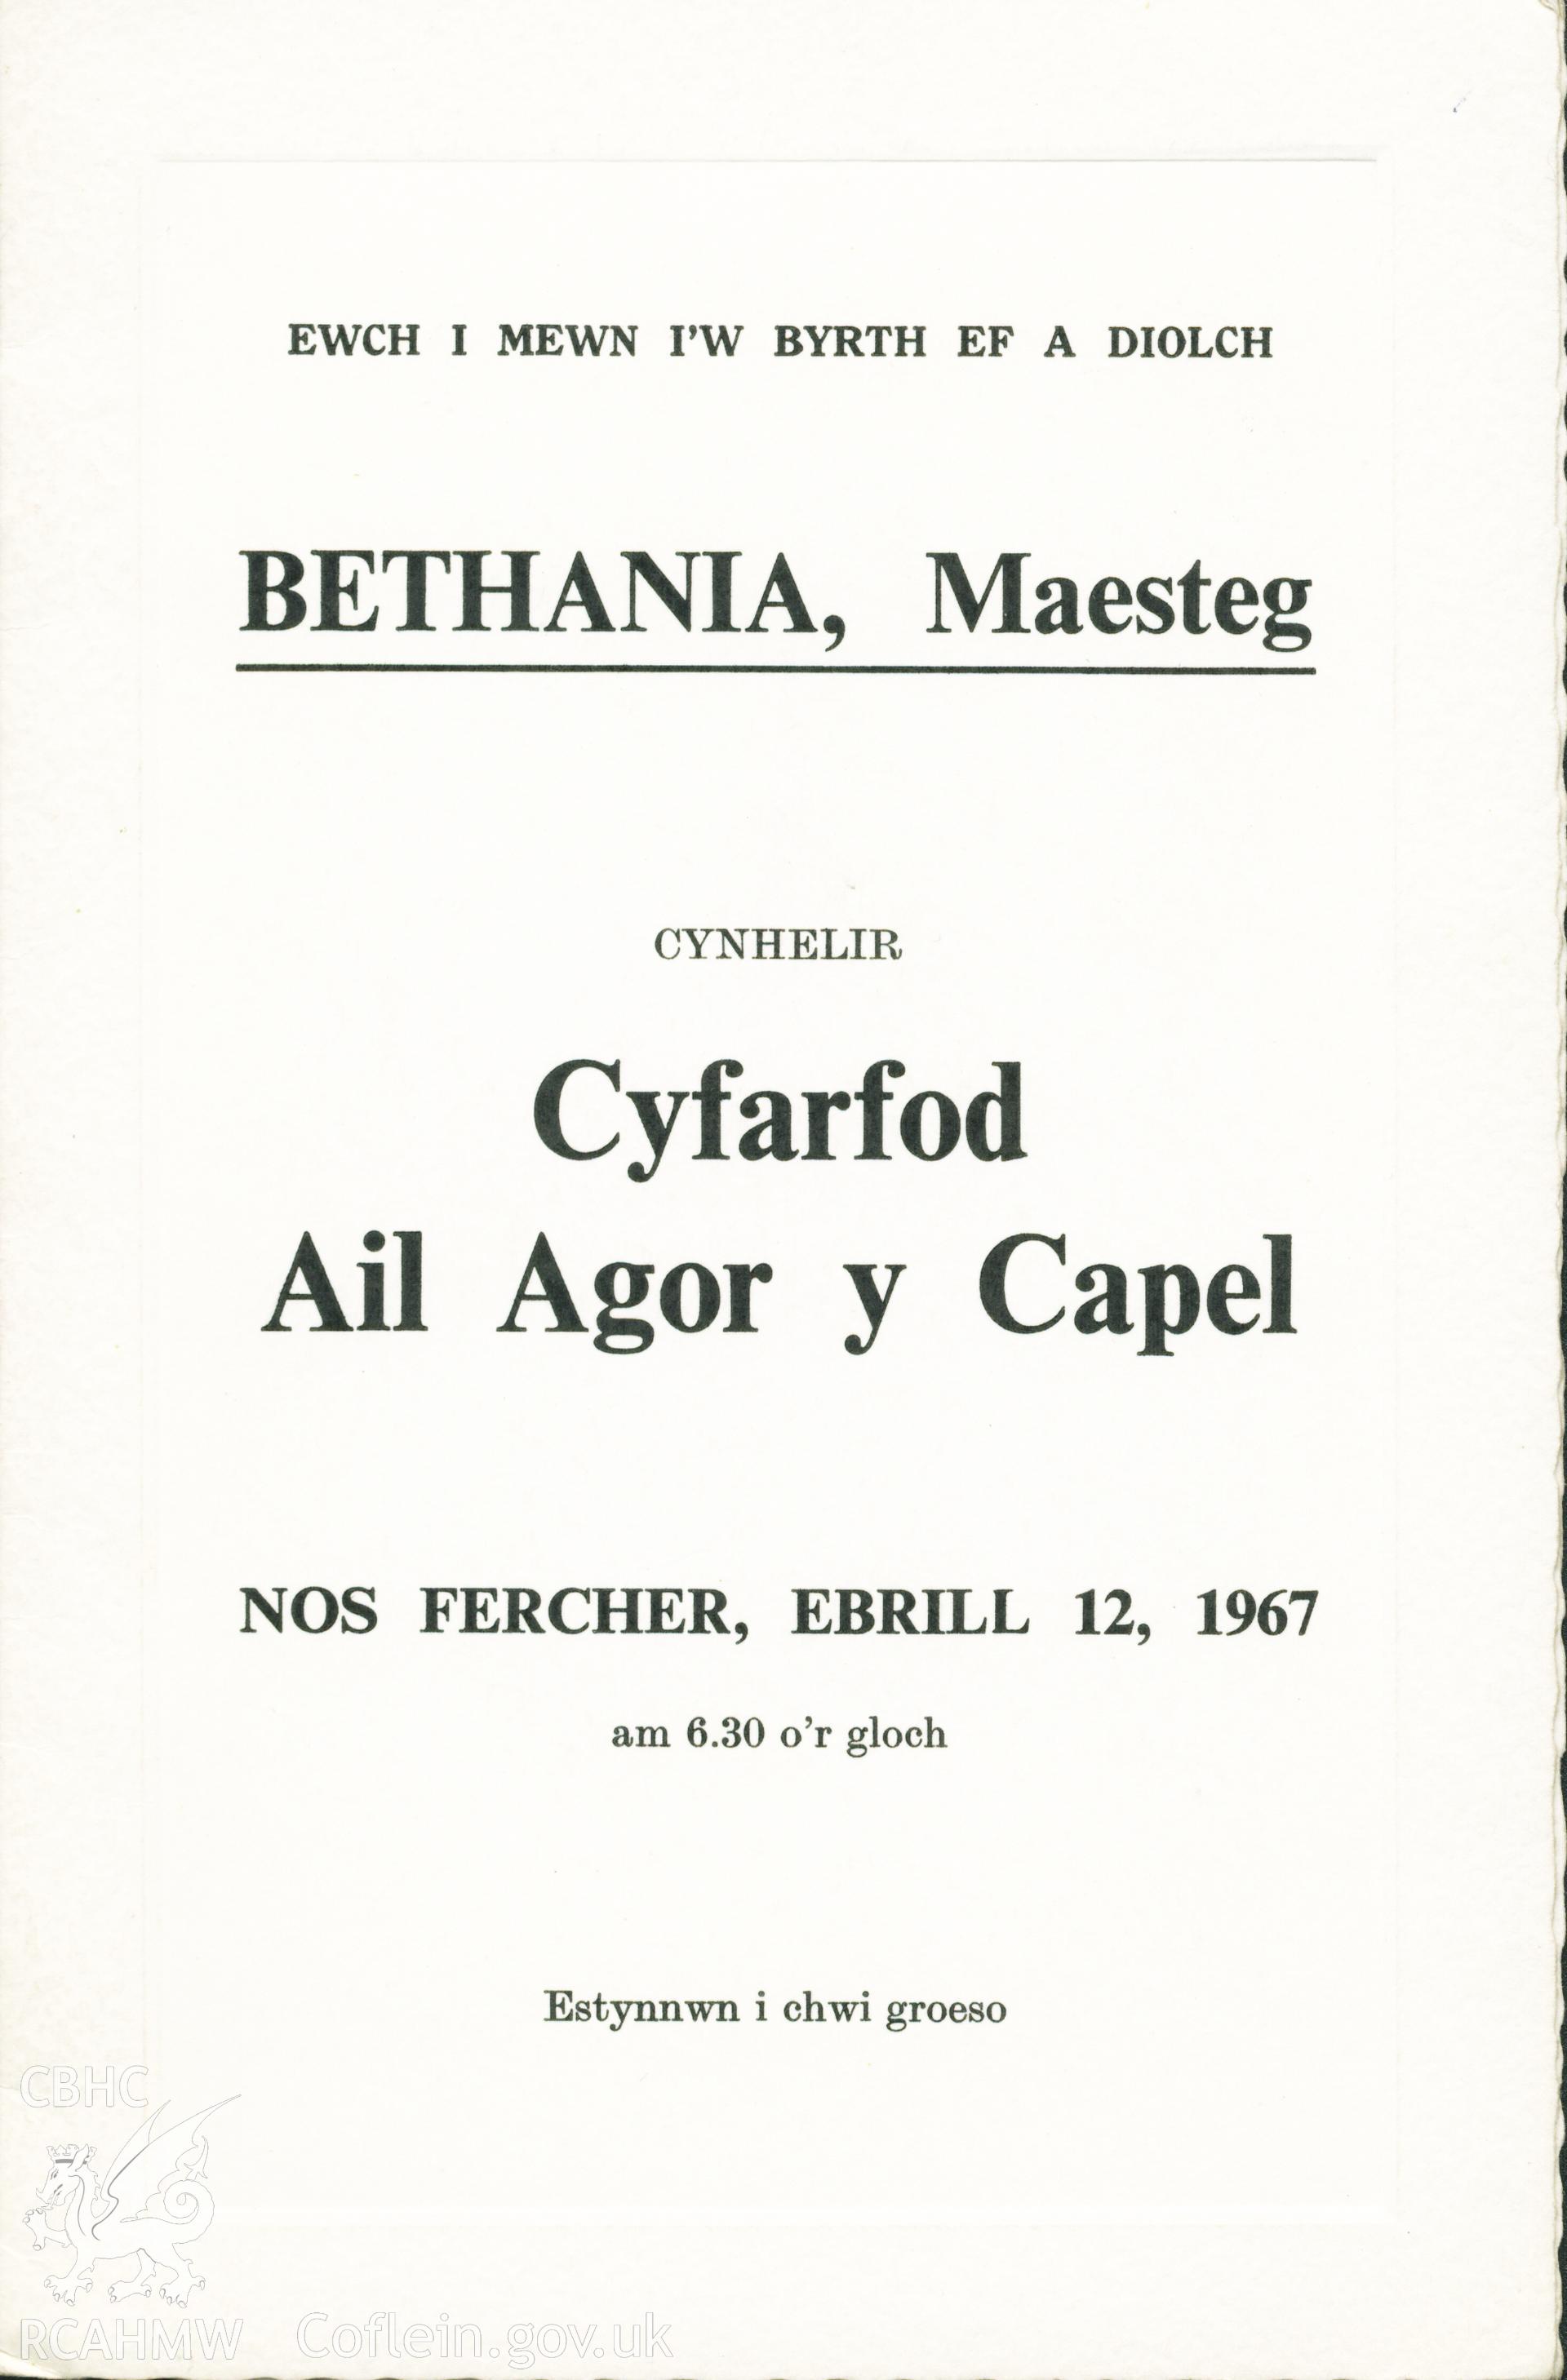 Copy of the programme for the second opening of Bethania Chapel on 12th April 1967. Donated to the RCAHMW by Enyd Carroll as part of the Digital Dissent Project.